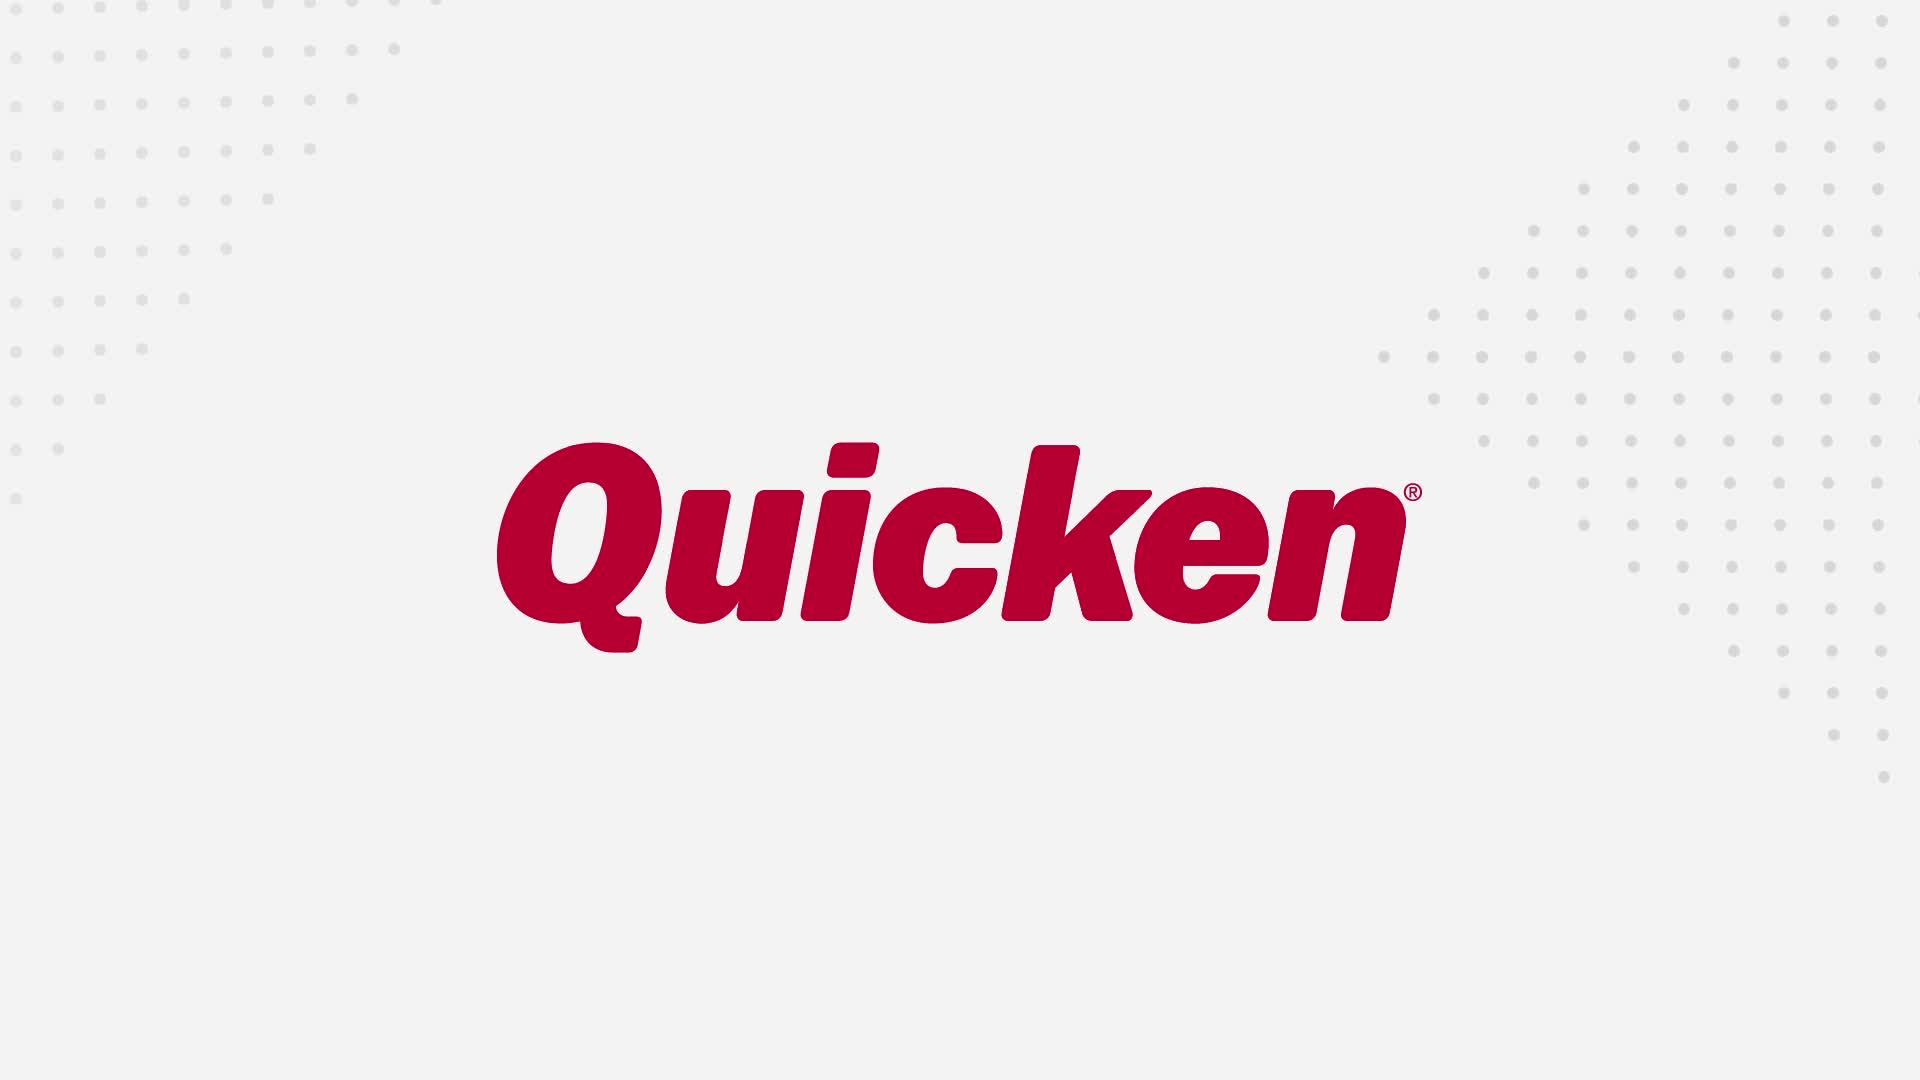 email invoice quicken 2015 home and business setup